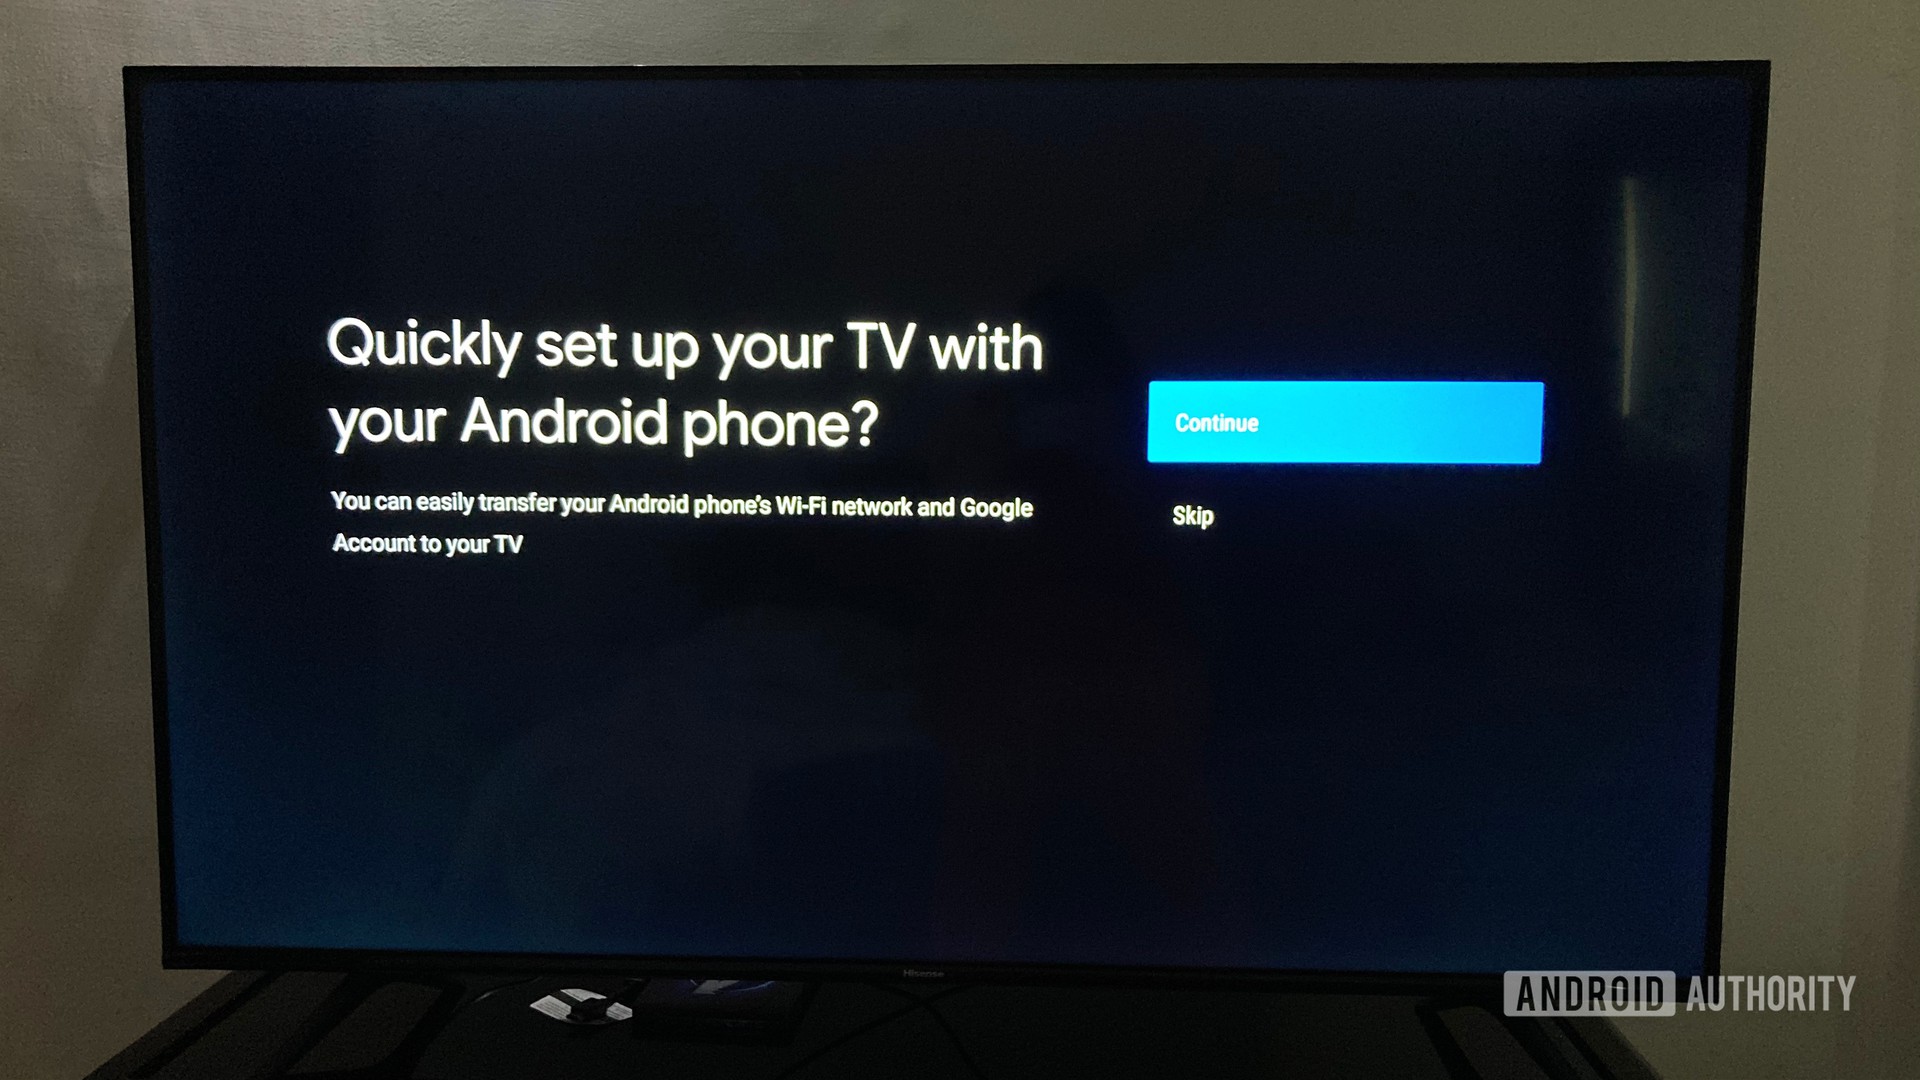 How to locate the Registration Code of the Android TV for the Sony